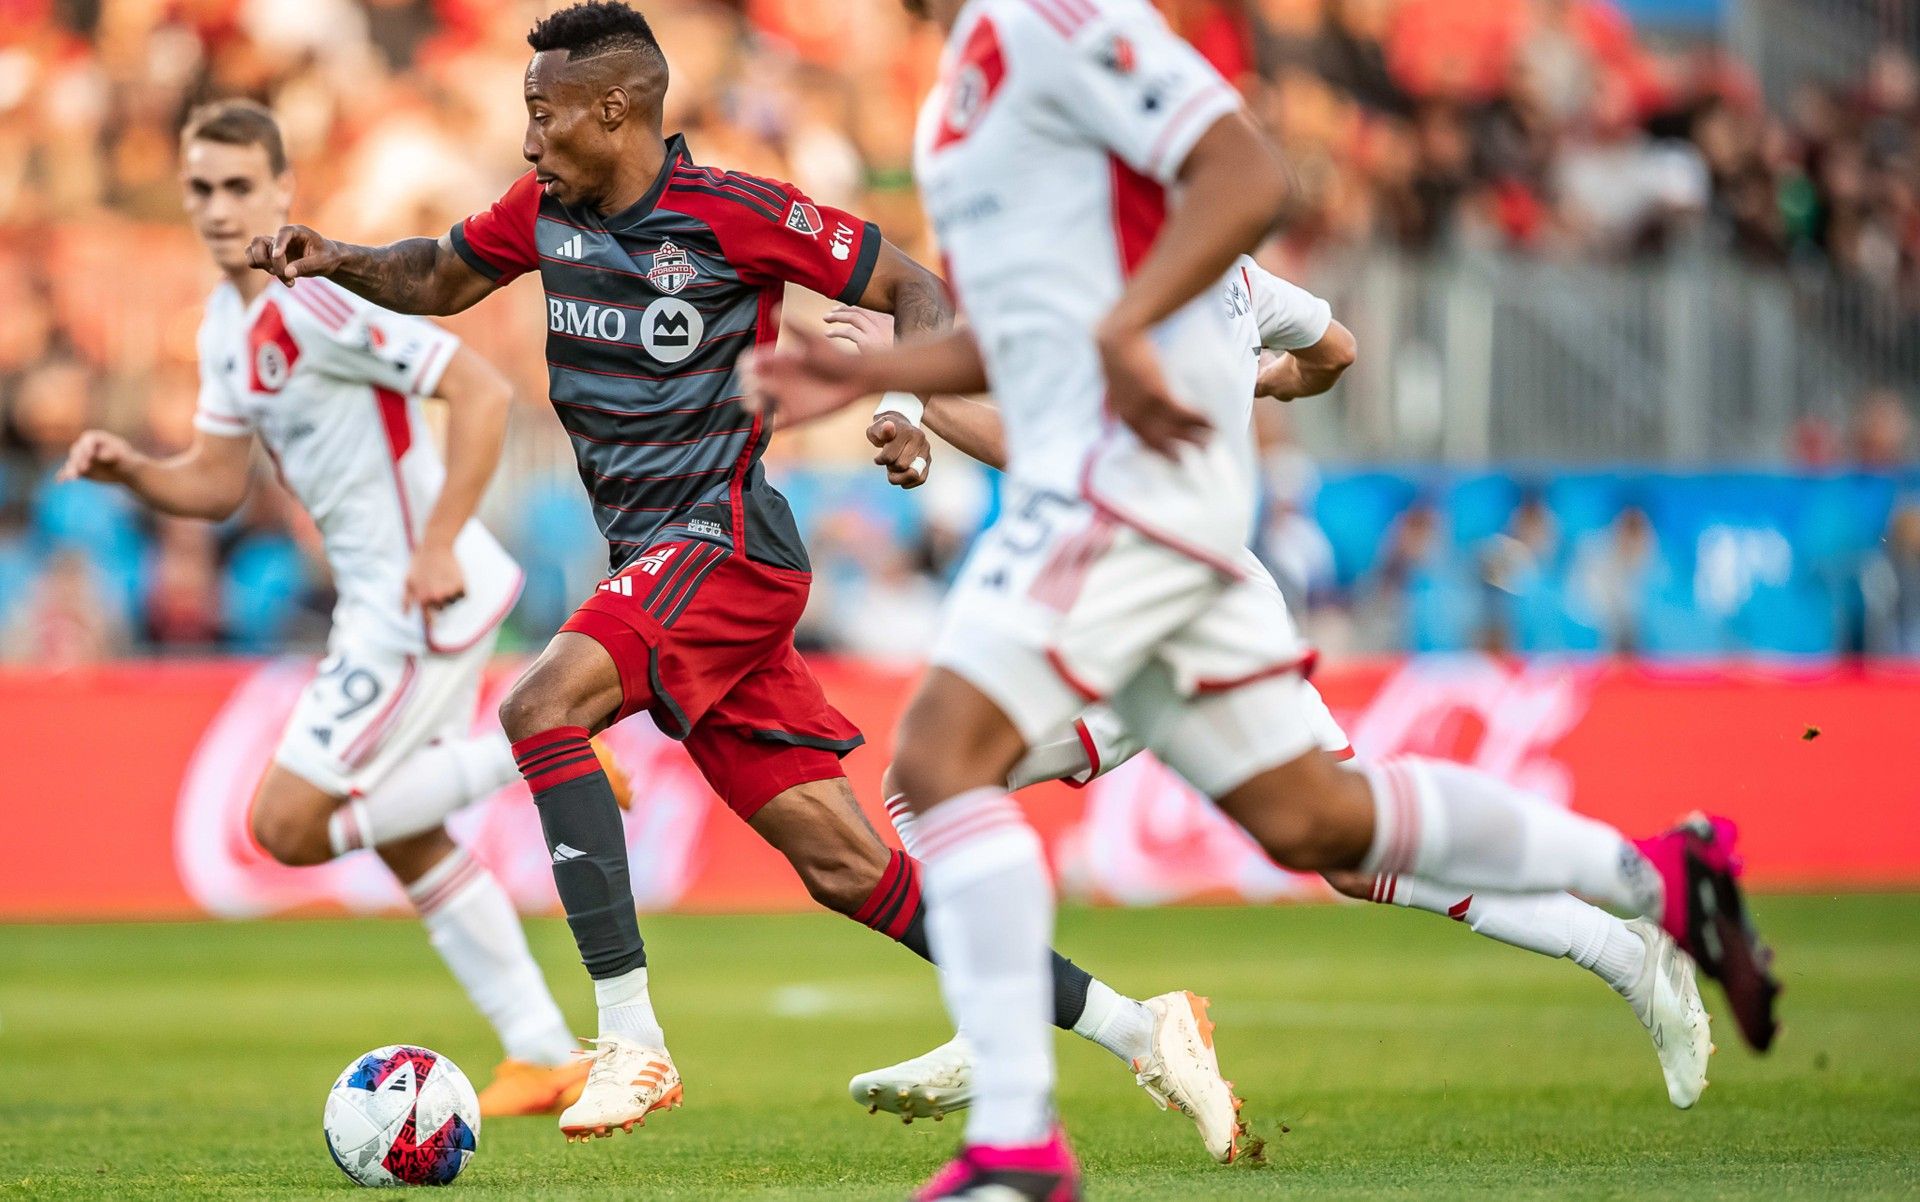 Toronto FC vs. CF Montreal: What you need to know